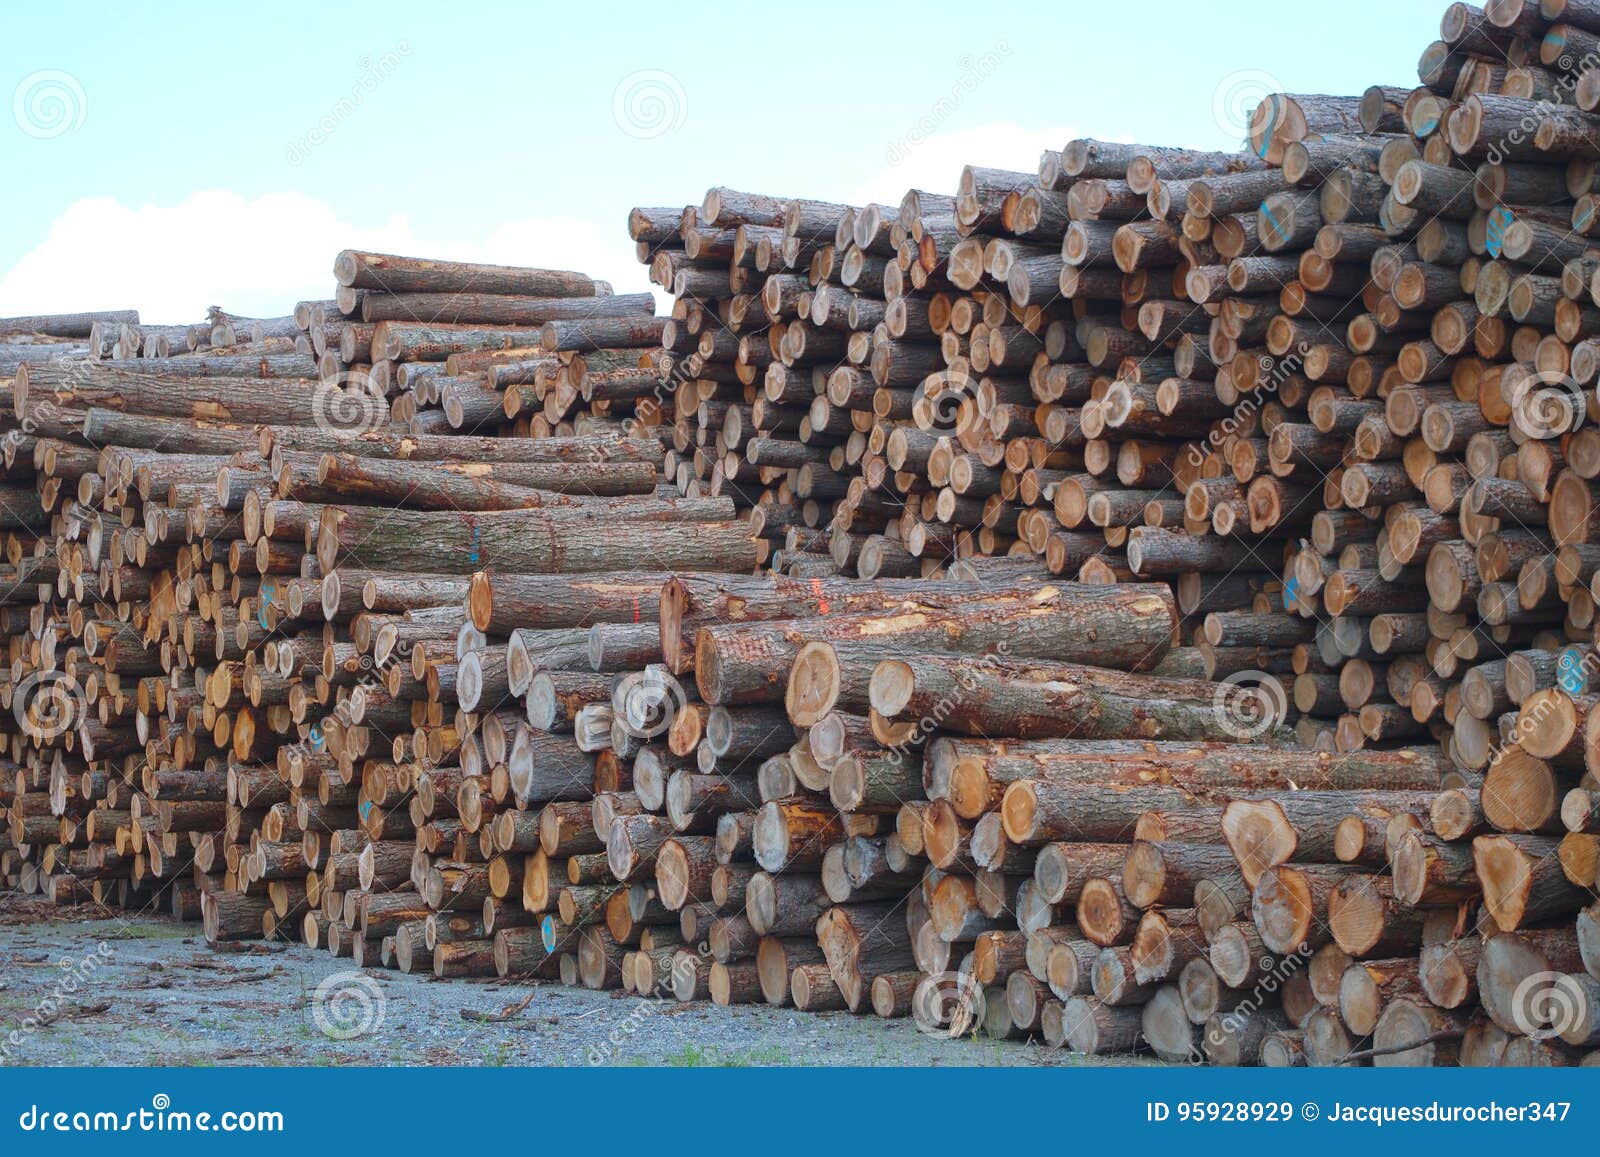 lumber yard business timber stacked forest industry environment lumbering wood